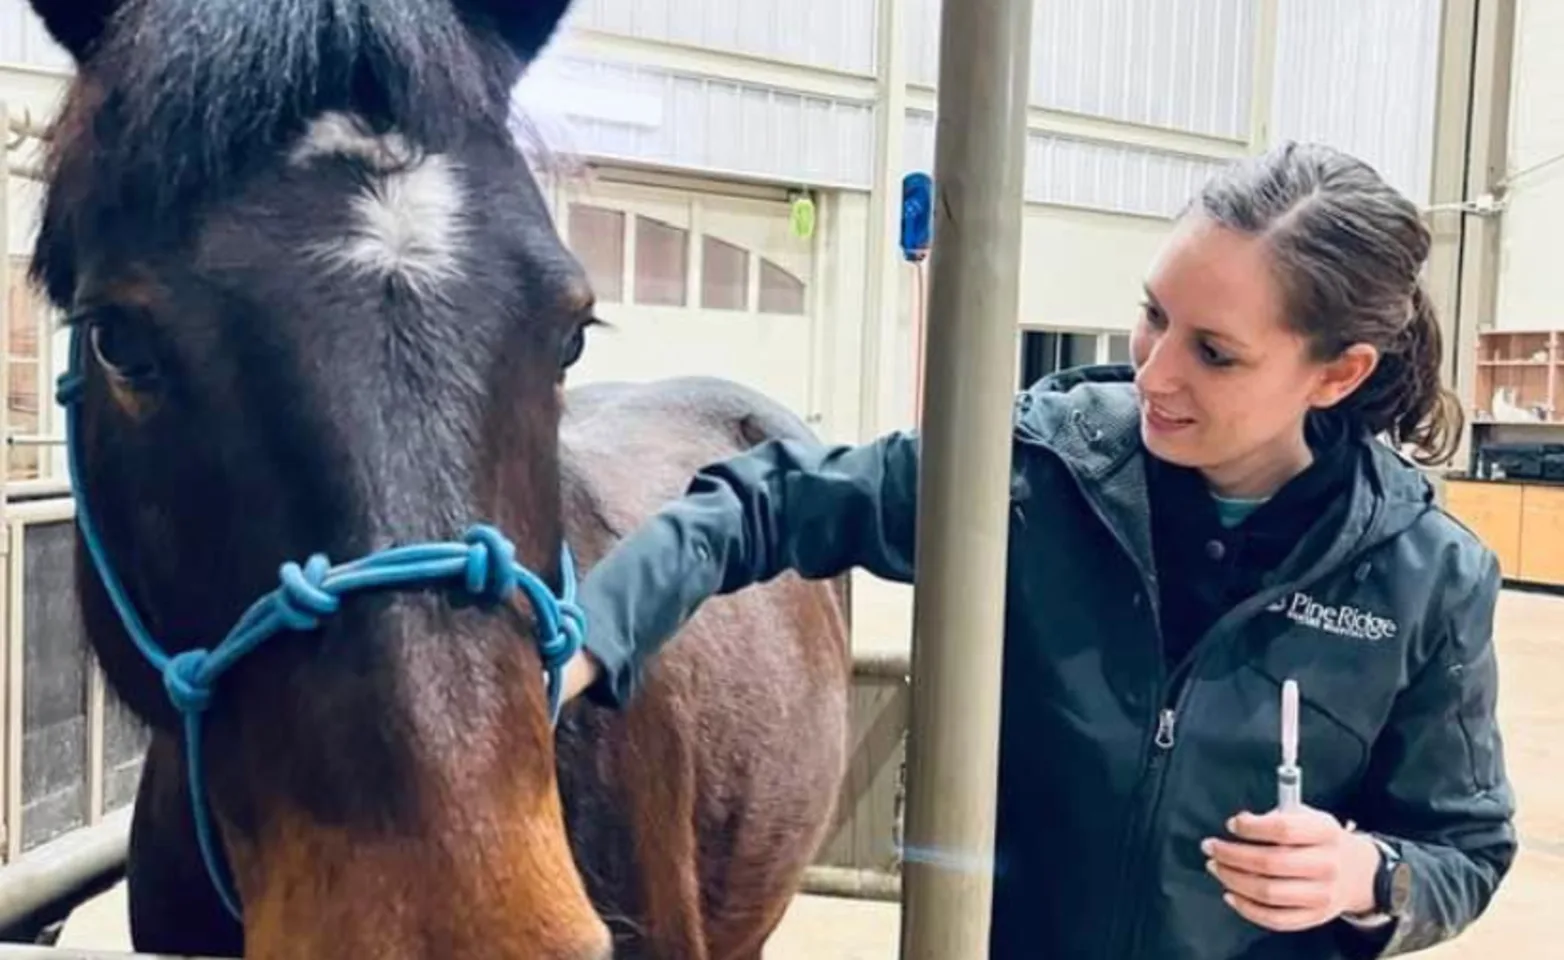 Staff caring for horses with blue bridle